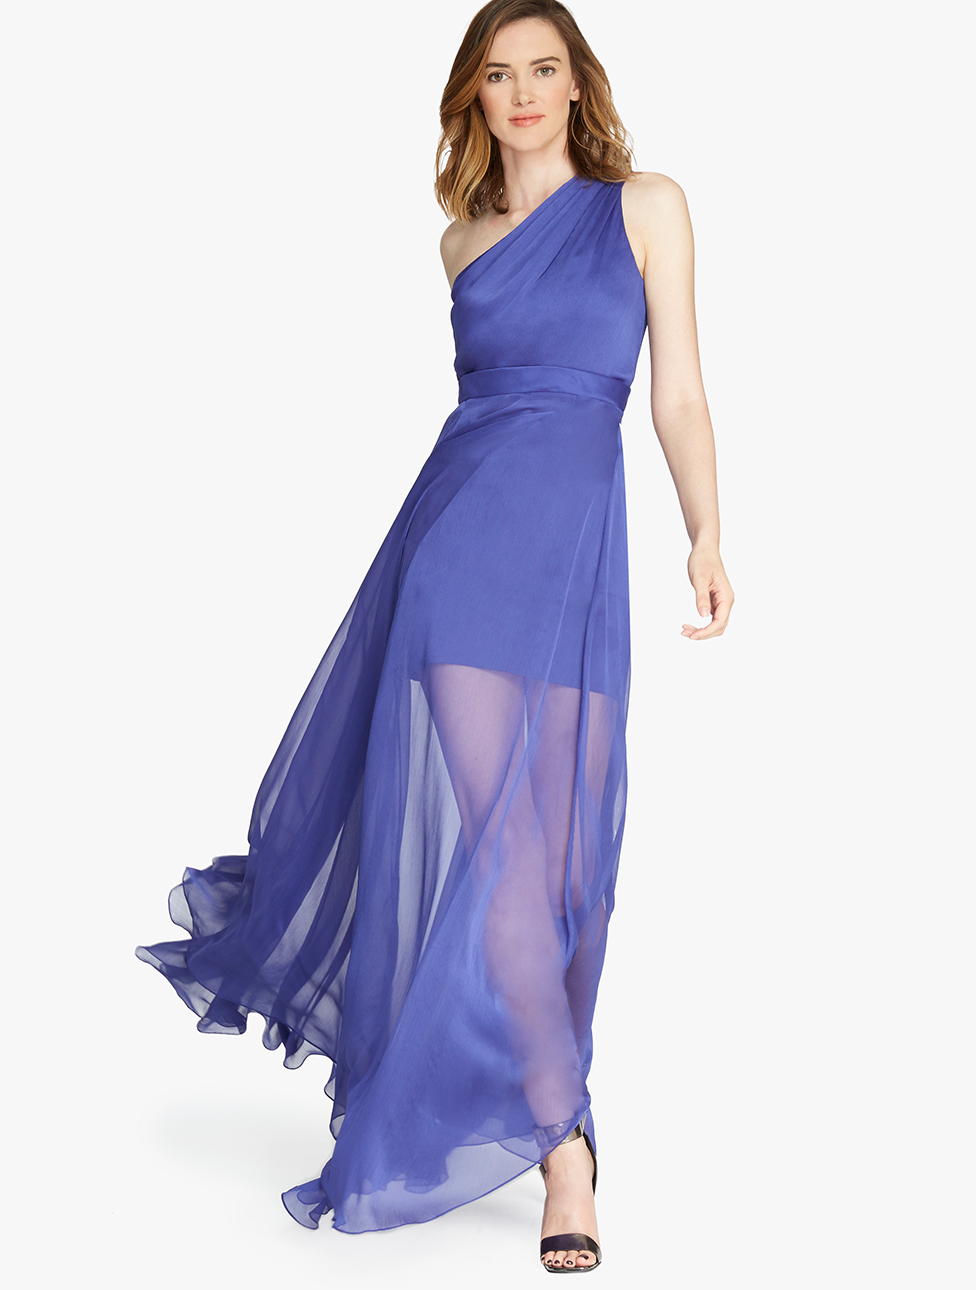 Lyst - Halston One-Shoulder Crinkled Chiffon Gown in Purple